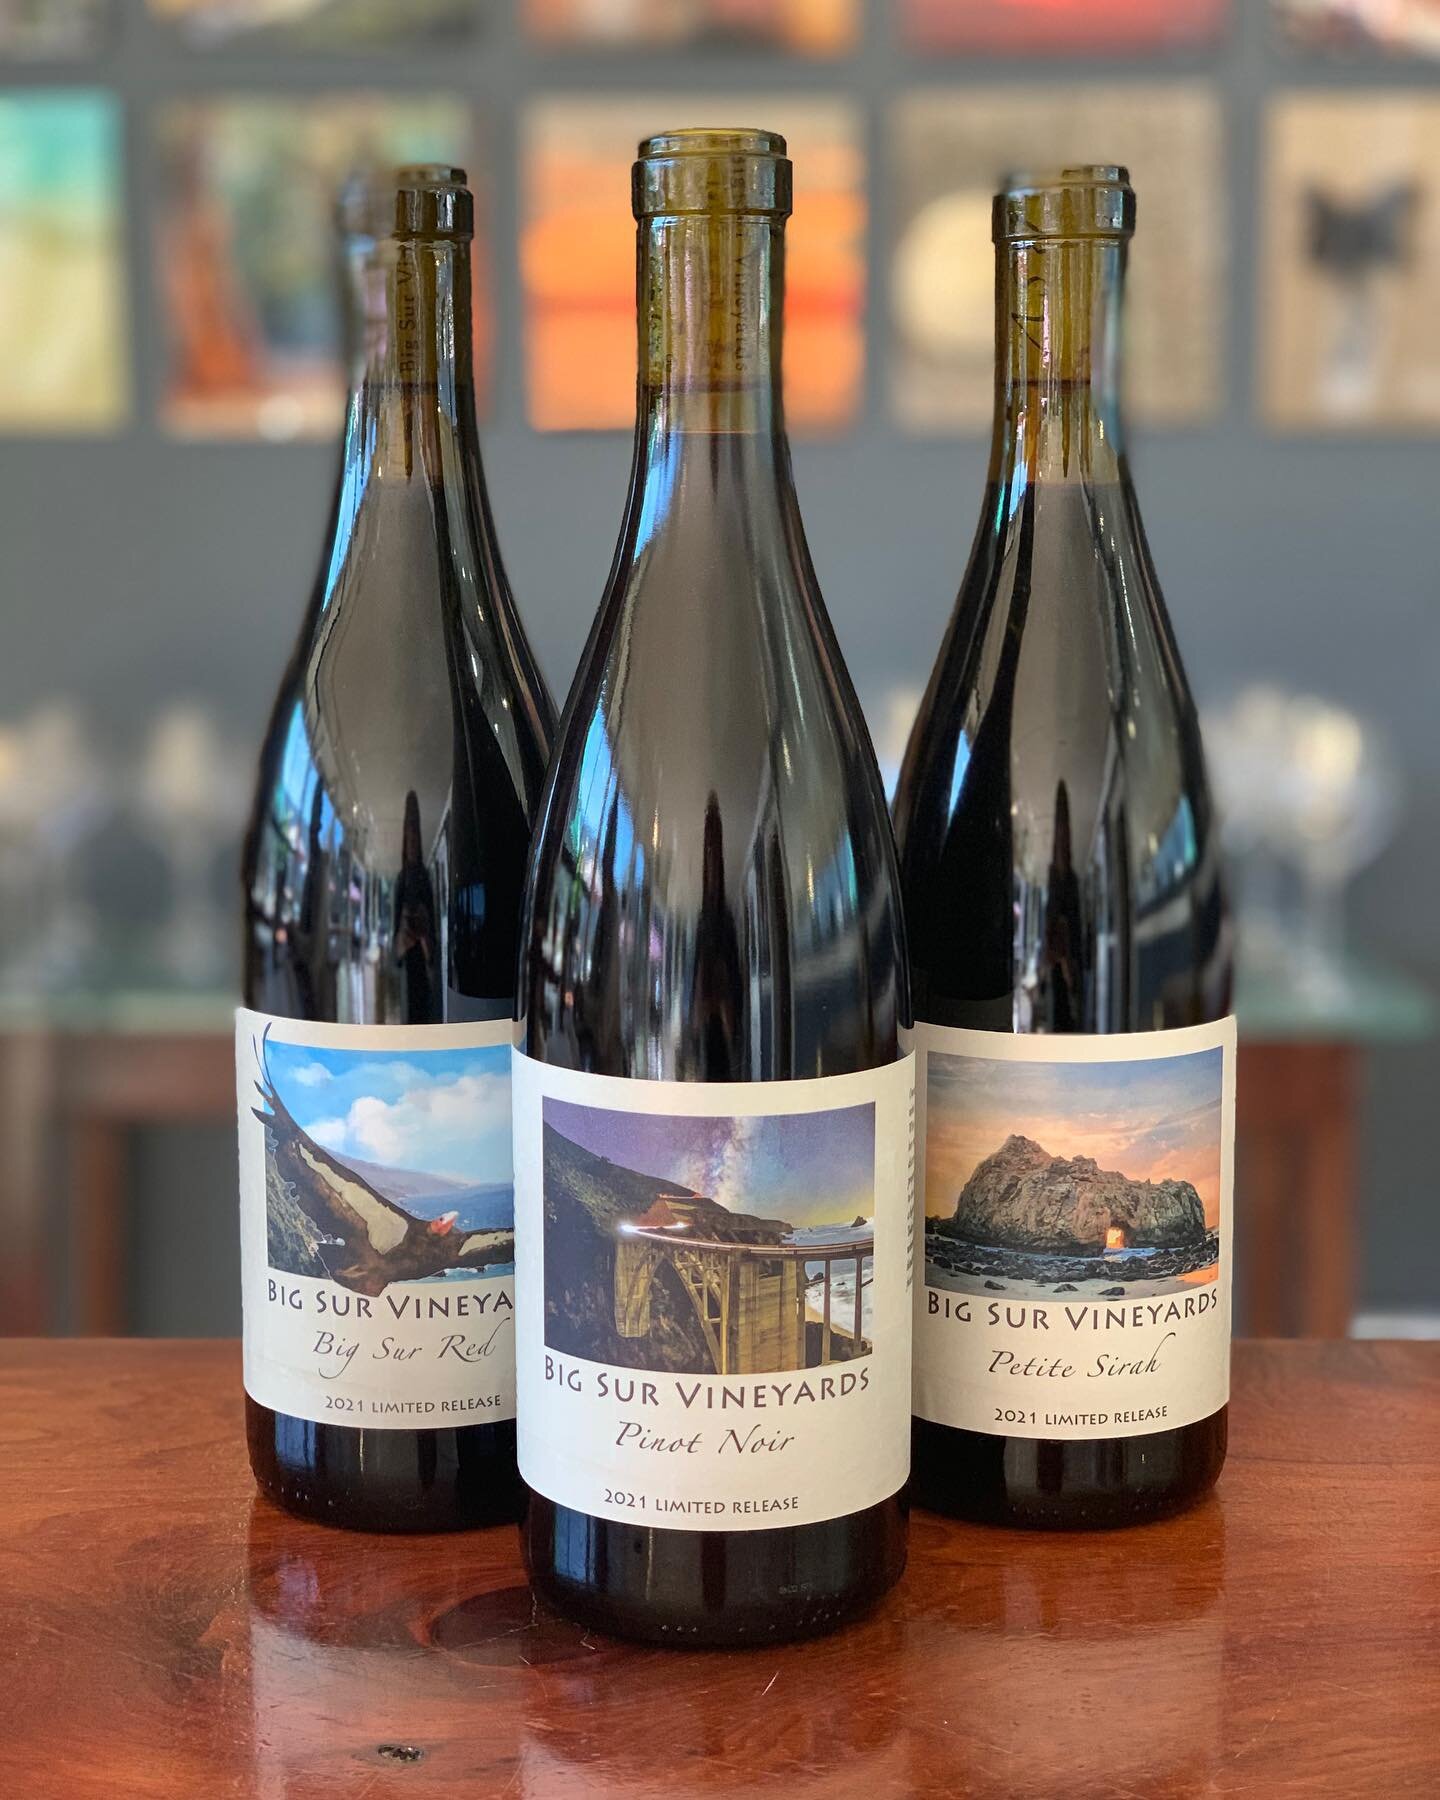 Sunday wine tasting today! Stop in to enjoy Chuck Brewer and Ernie Buck today from 3-5 playing our favorite covers and lots of original songs! #livemusic #winelovers #carmelvalley #carmelbythesea #bigsur #redwine🍷 @montereywines @seemonterey @bigsur